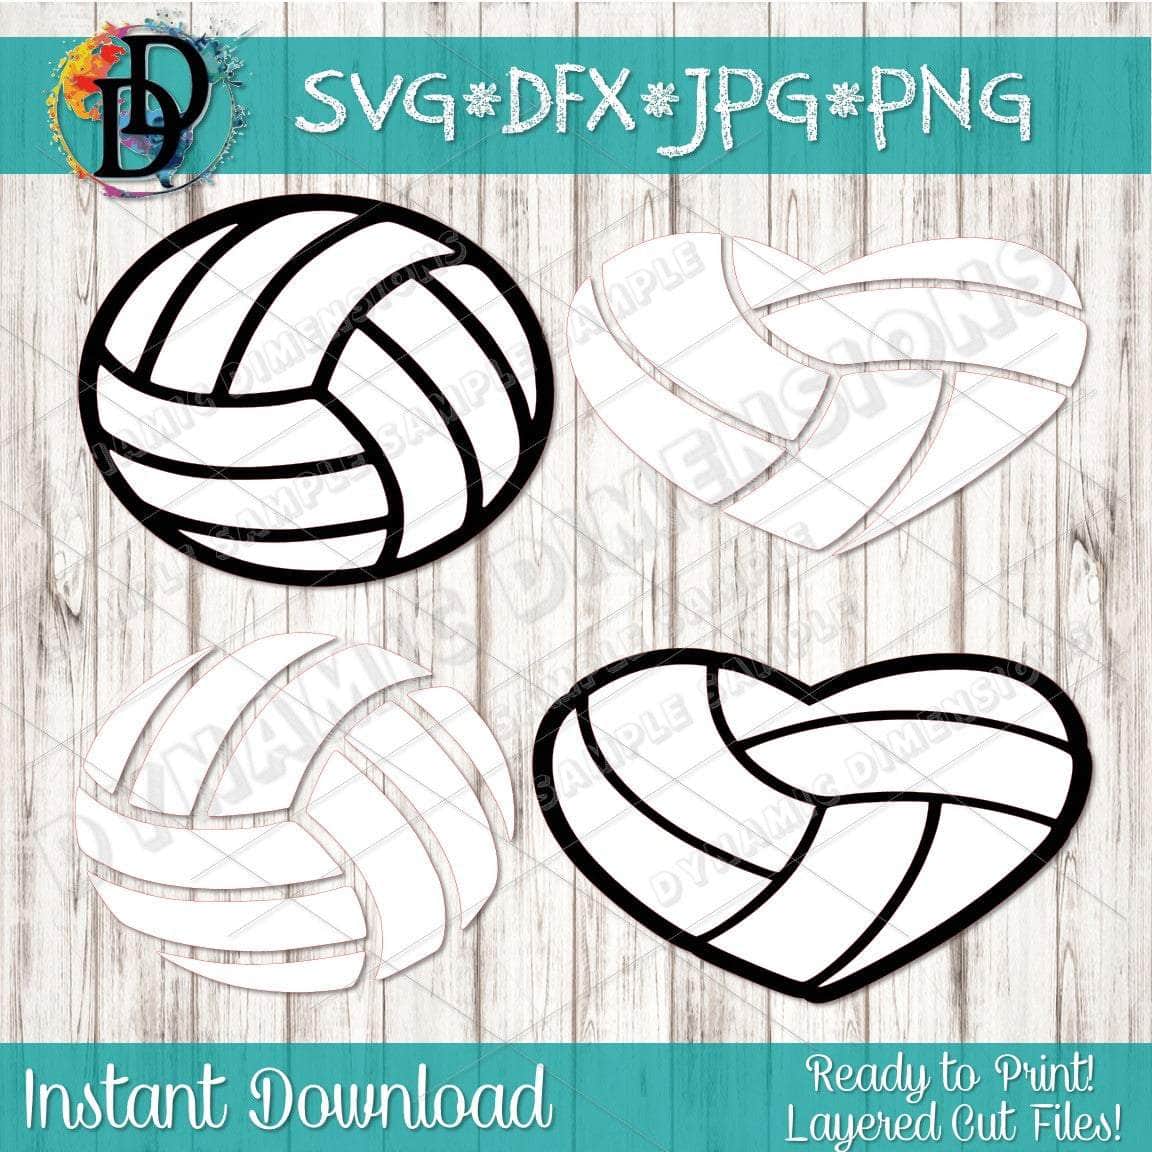 volleyball clip art yelling